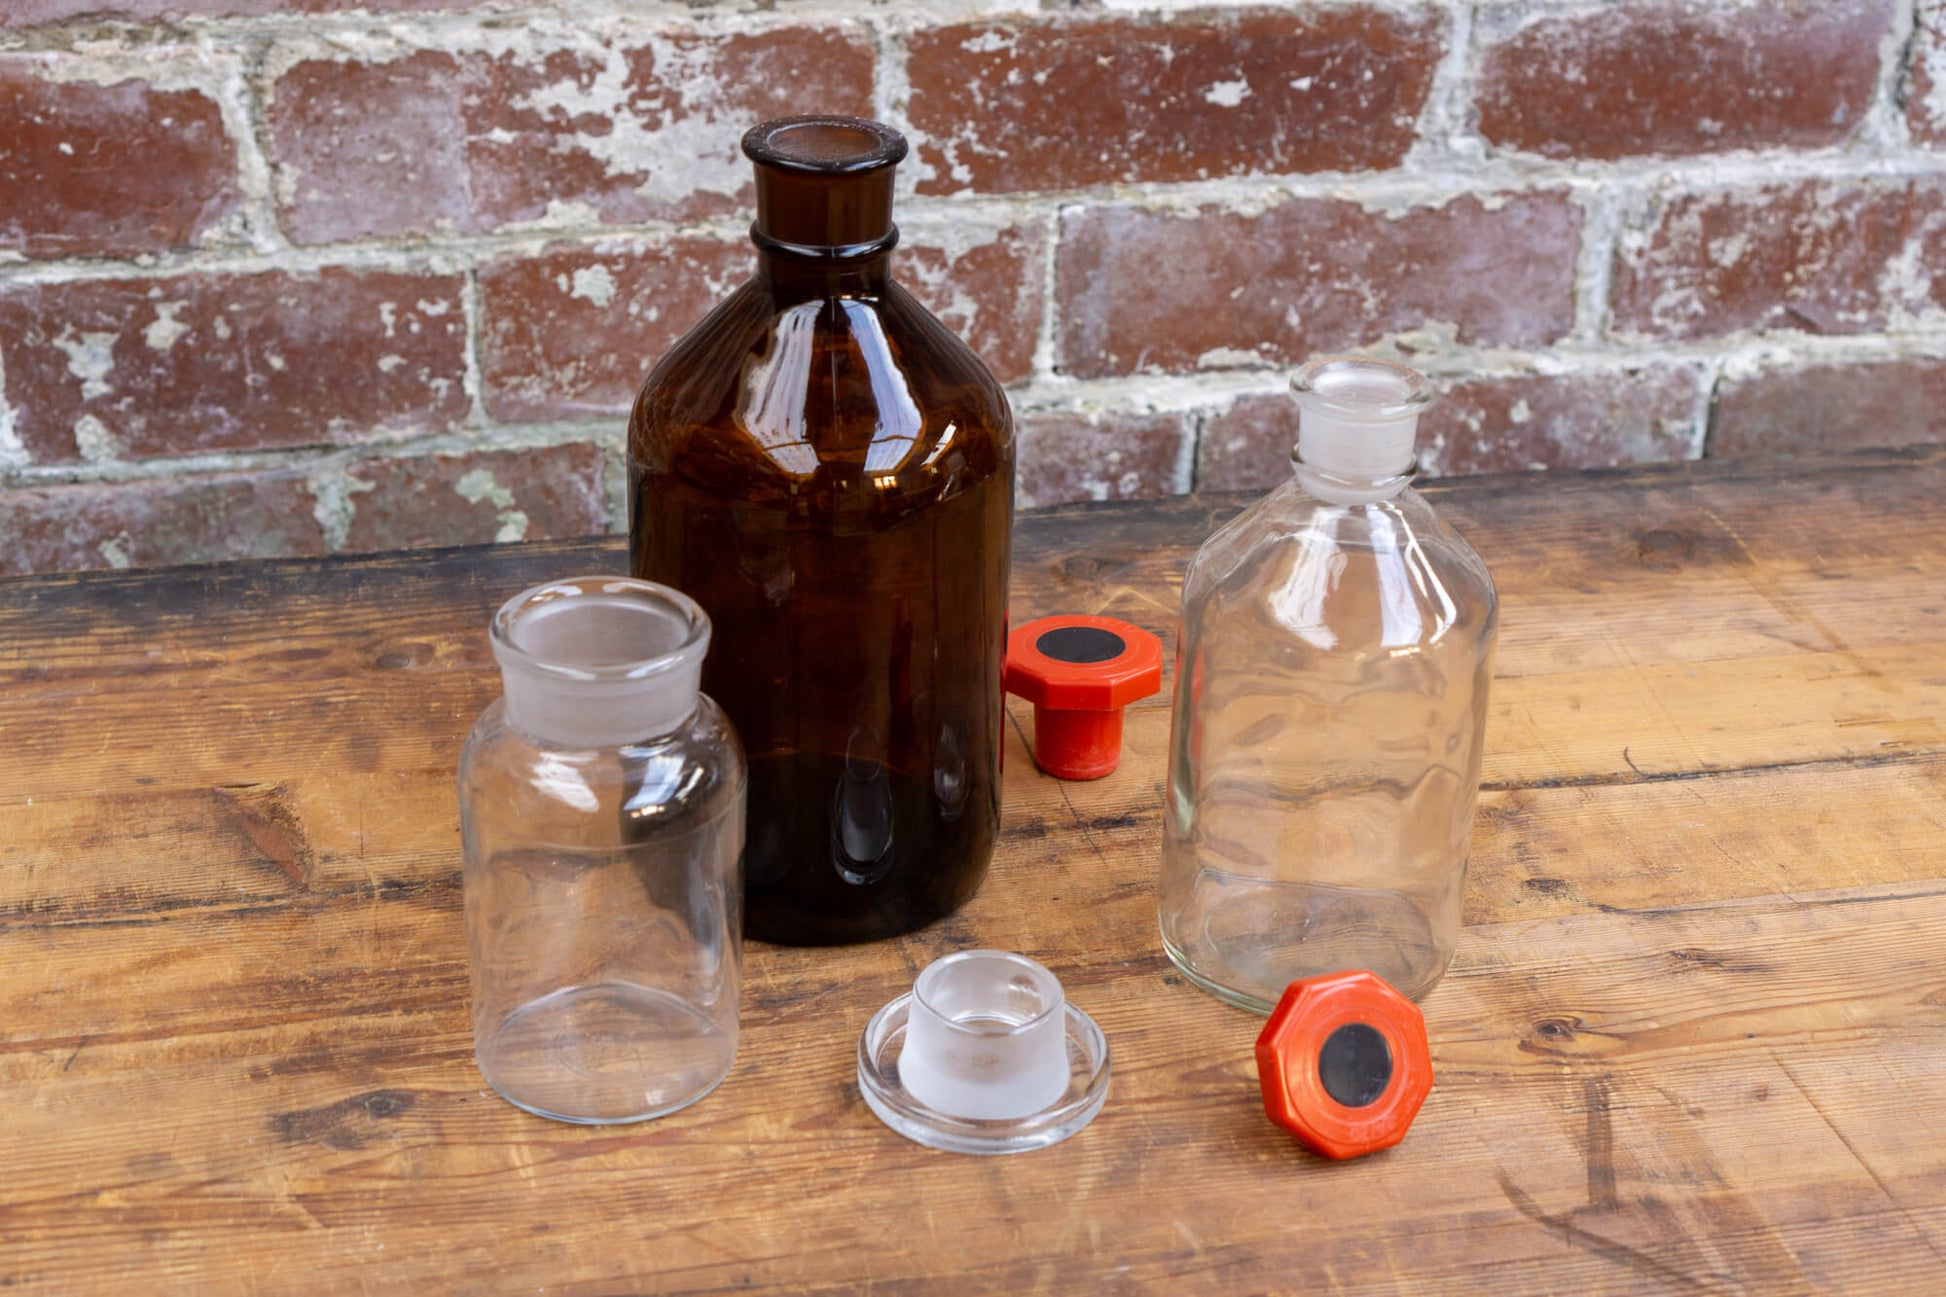 Photo shows a selection of vintage apothecary style glass science bottles atop a wood table. The background is a red rustic brick wall.